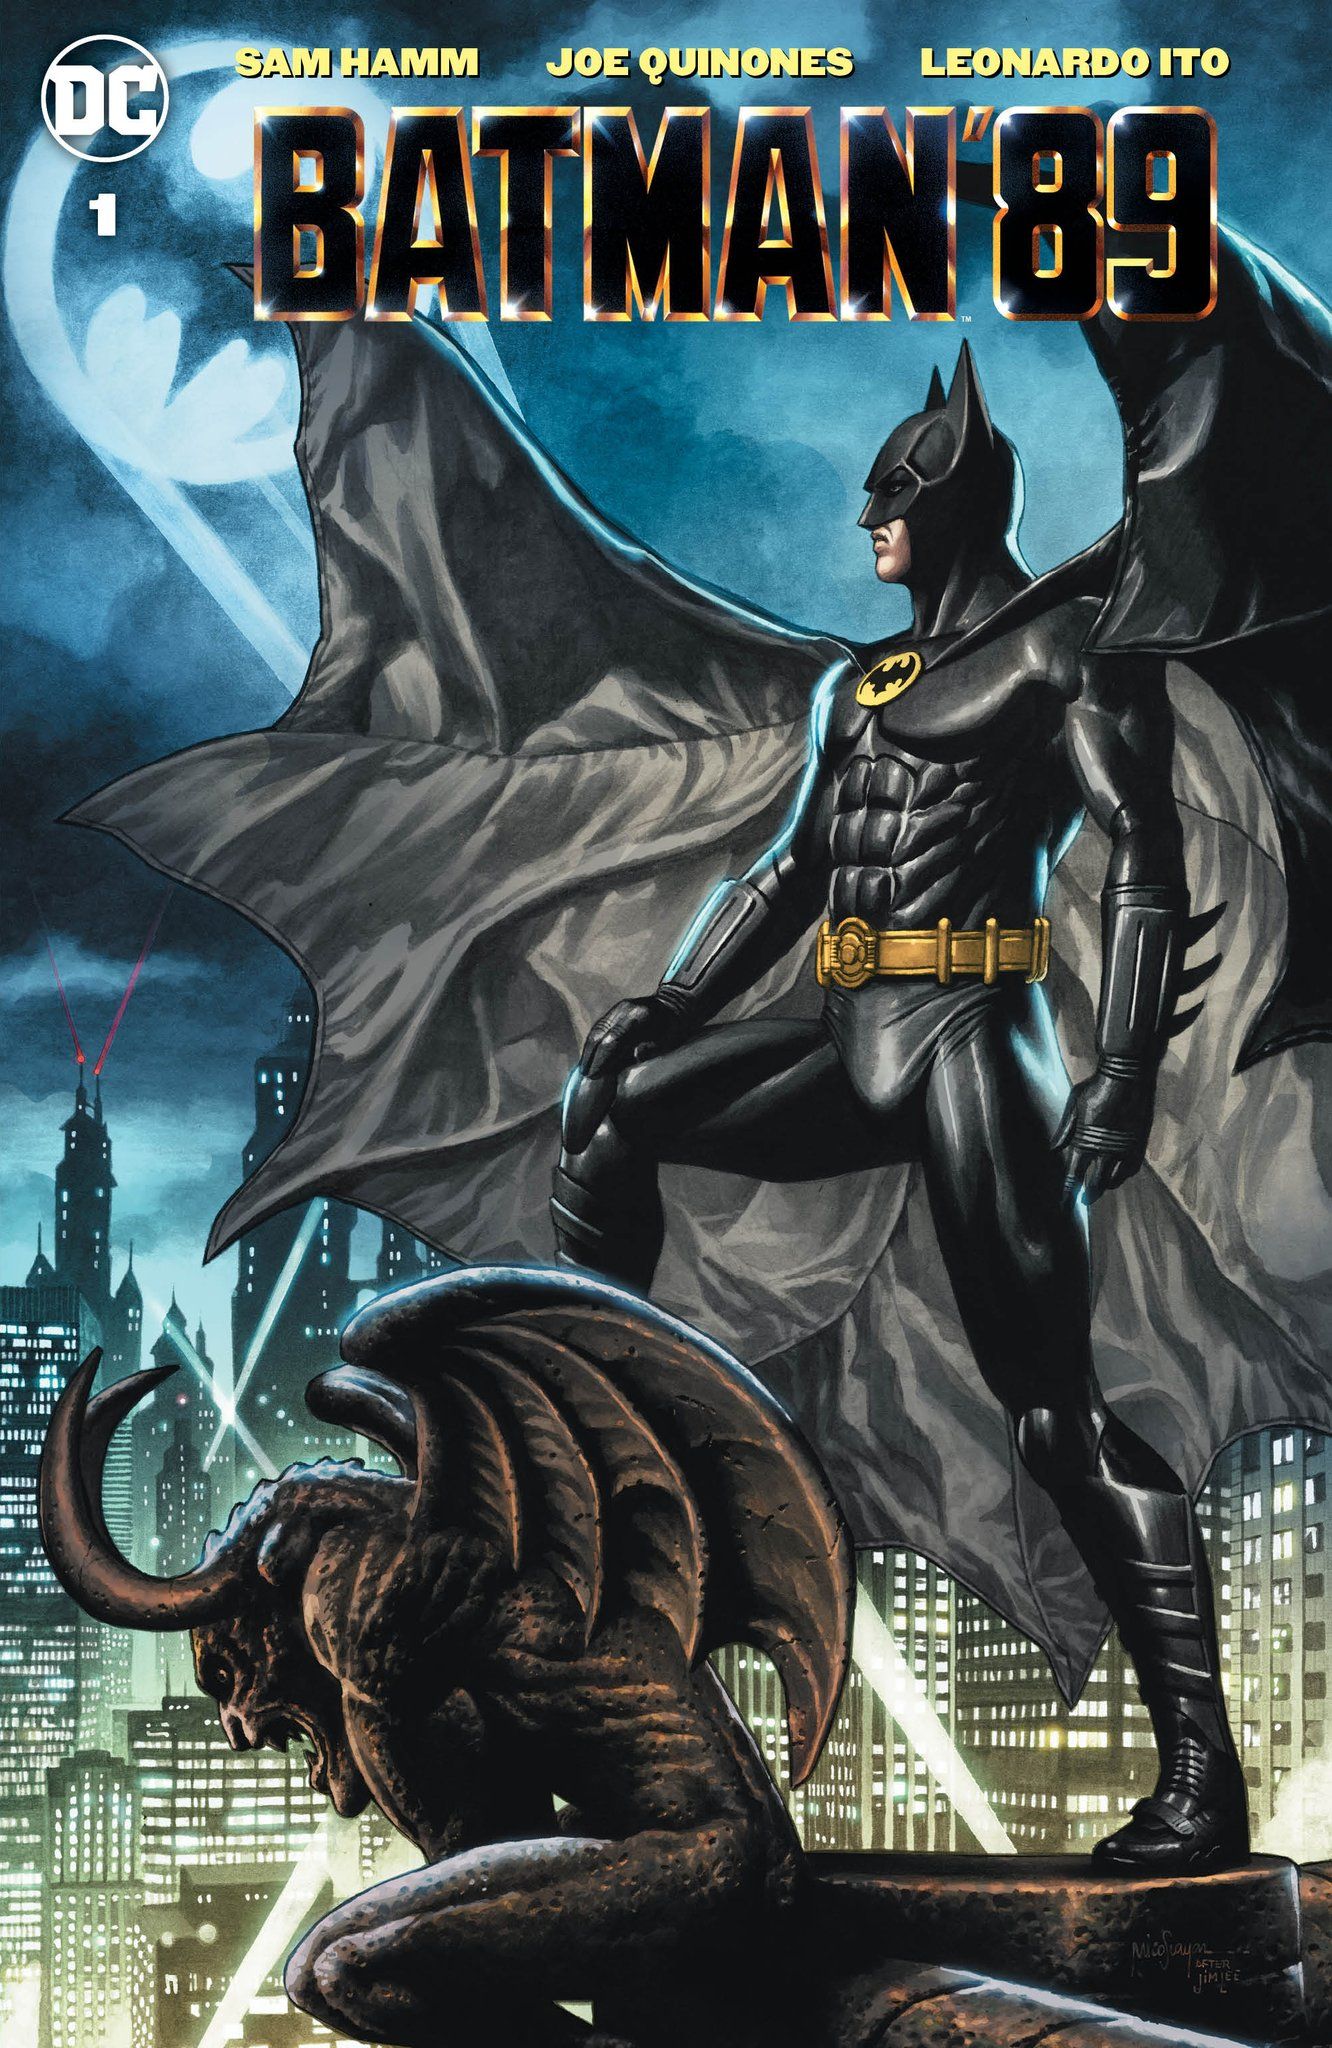 Mico Suayan's Big Time Collectibles-exclusivecover for Batman '89, with trade dress.